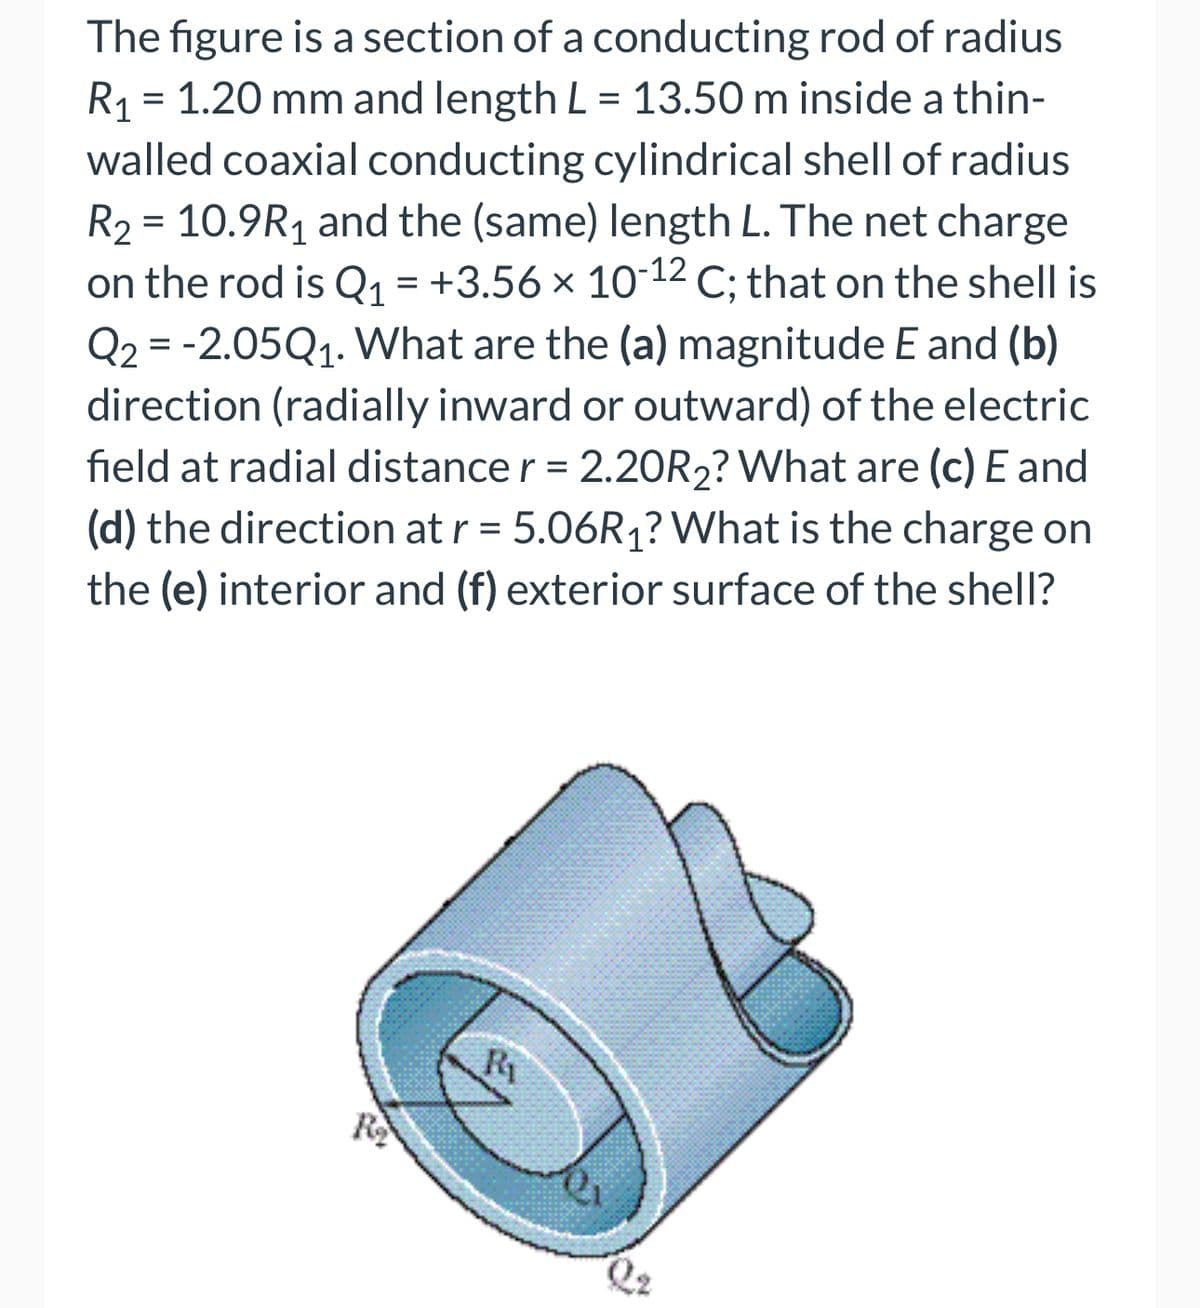 The figure is a section of a conducting rod of radius
R₁ = 1.20 mm and length L = 13.50 m inside a thin-
walled coaxial conducting cylindrical shell of radius
R₂ = 10.9R₁ and the (same) length L. The net charge
on the rod is Q₁ = +3.56 × 10-¹2 C; that on the shell is
Q2 = -2.05Q₁. What are the (a) magnitude E and (b)
direction (radially inward or outward) of the electric
field at radial distance r = 2.20R2? What are (c) E and
(d) the direction at r = 5.06R₁? What is the charge on
the (e) interior and (f) exterior surface of the shell?
R₂
Ri
ex